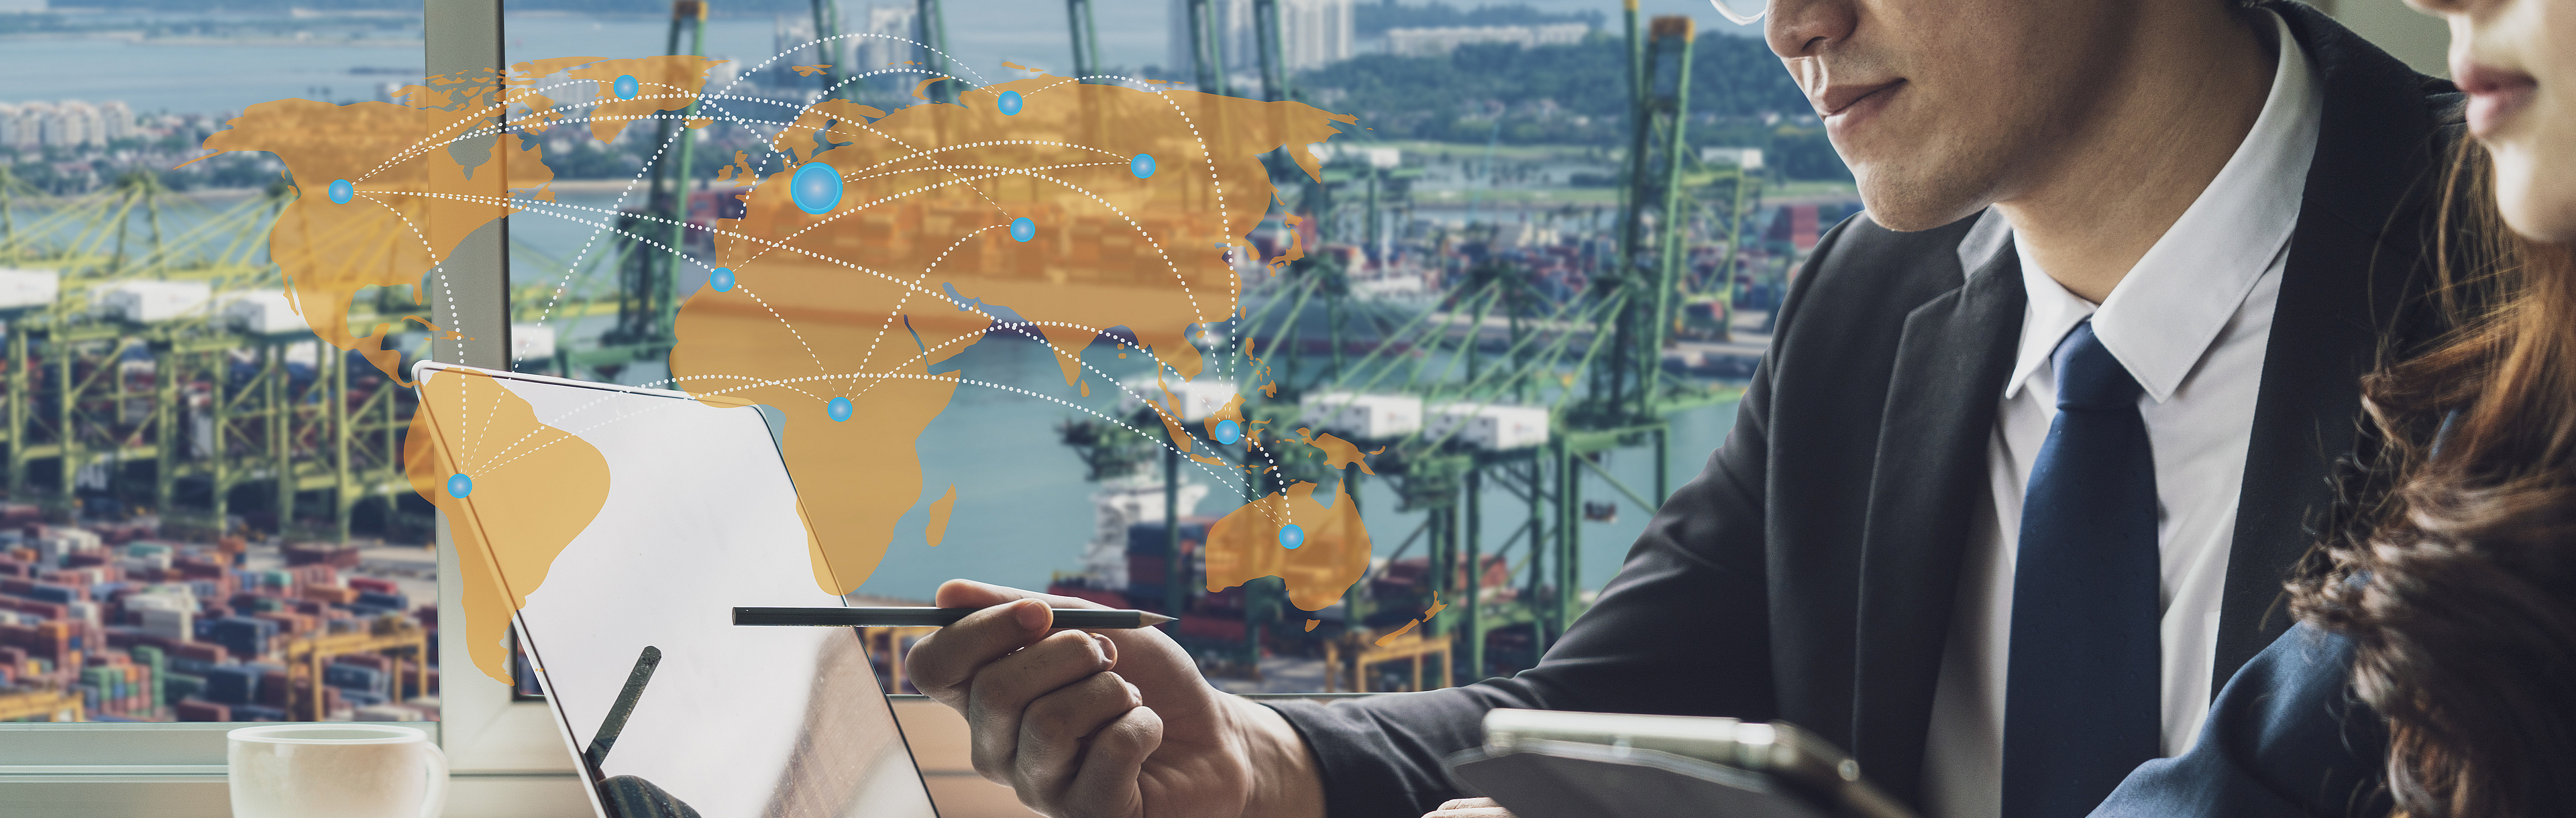 In the background of the picture you can see several harbour basins with various loading cranes, while in the foreground a woman and a man are sitting in front of a screen at a meeting. Superimposed on the image is an orange world map with dotted lines connecting places all over the world.